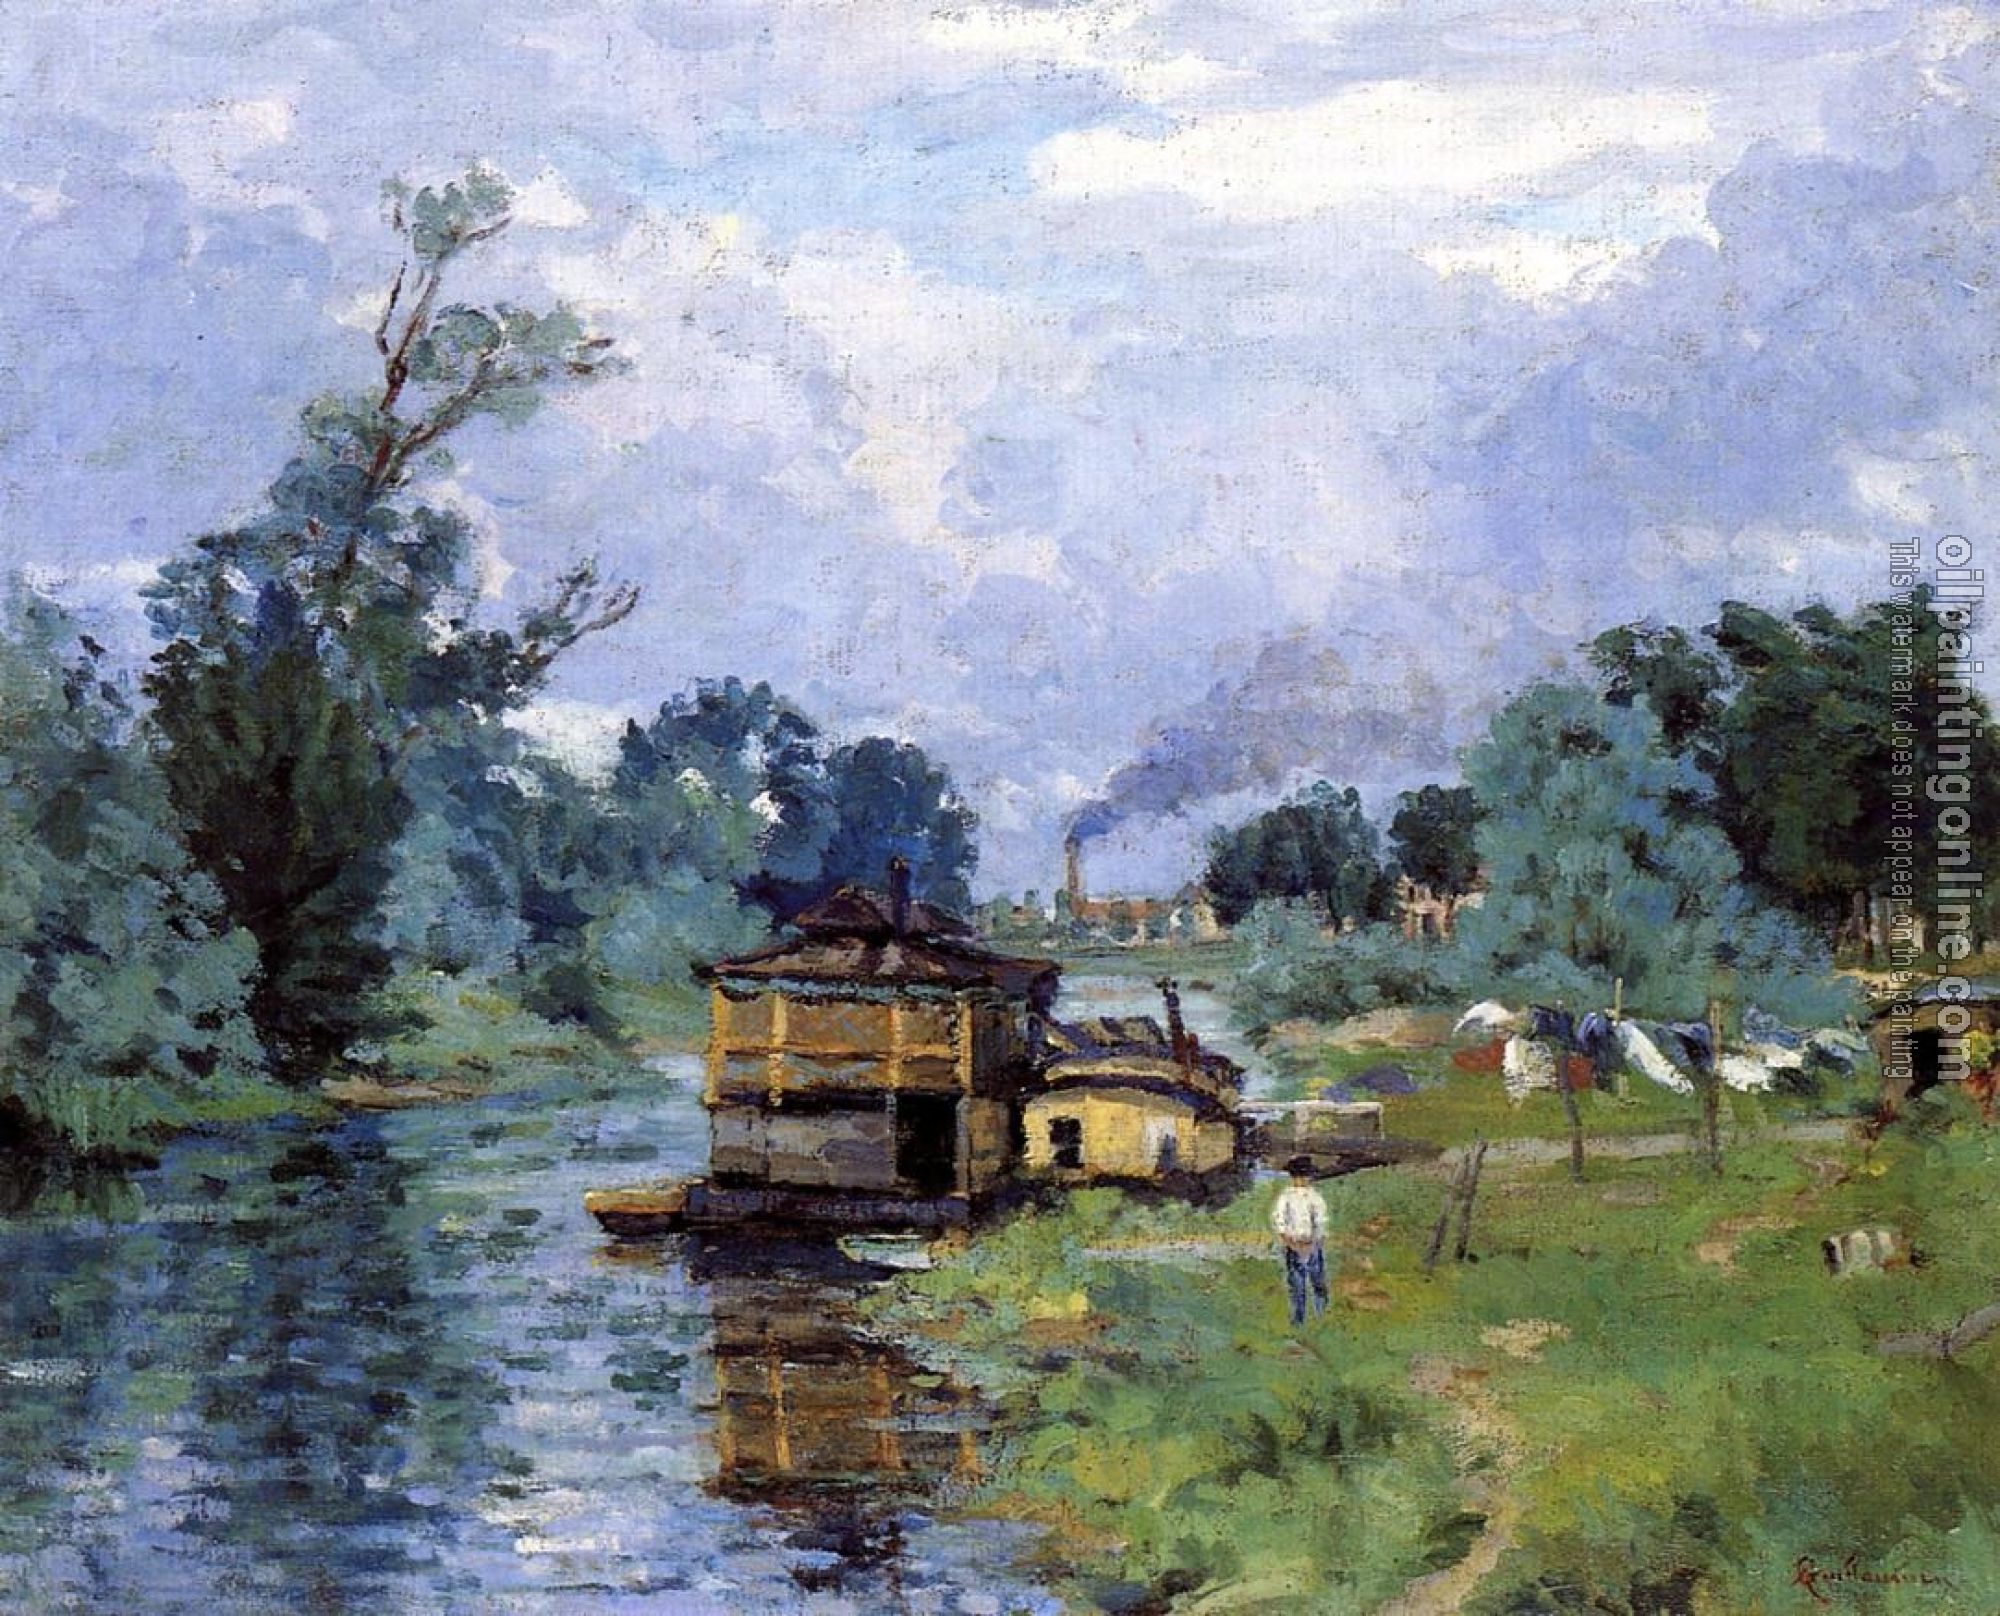 Guillaumin, Armand - The Banks of the River